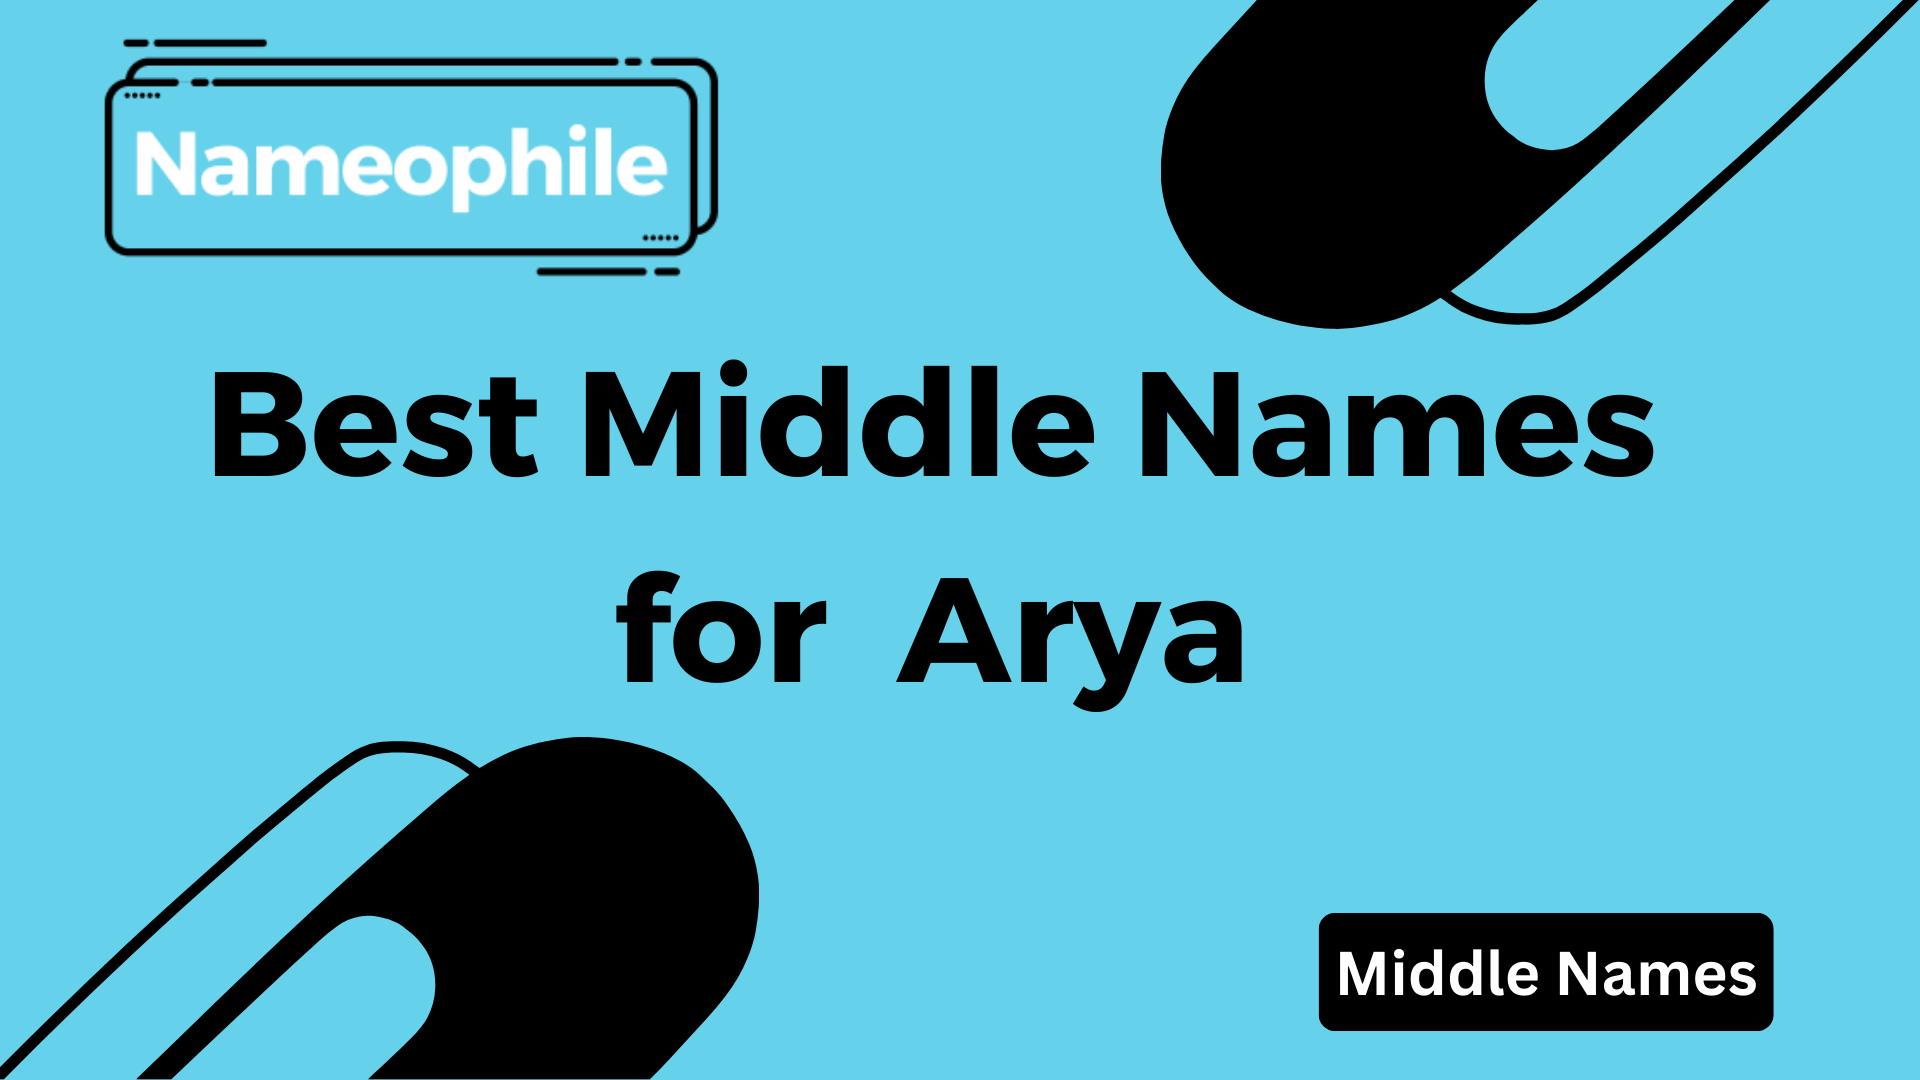 Best Middle Names for Arya